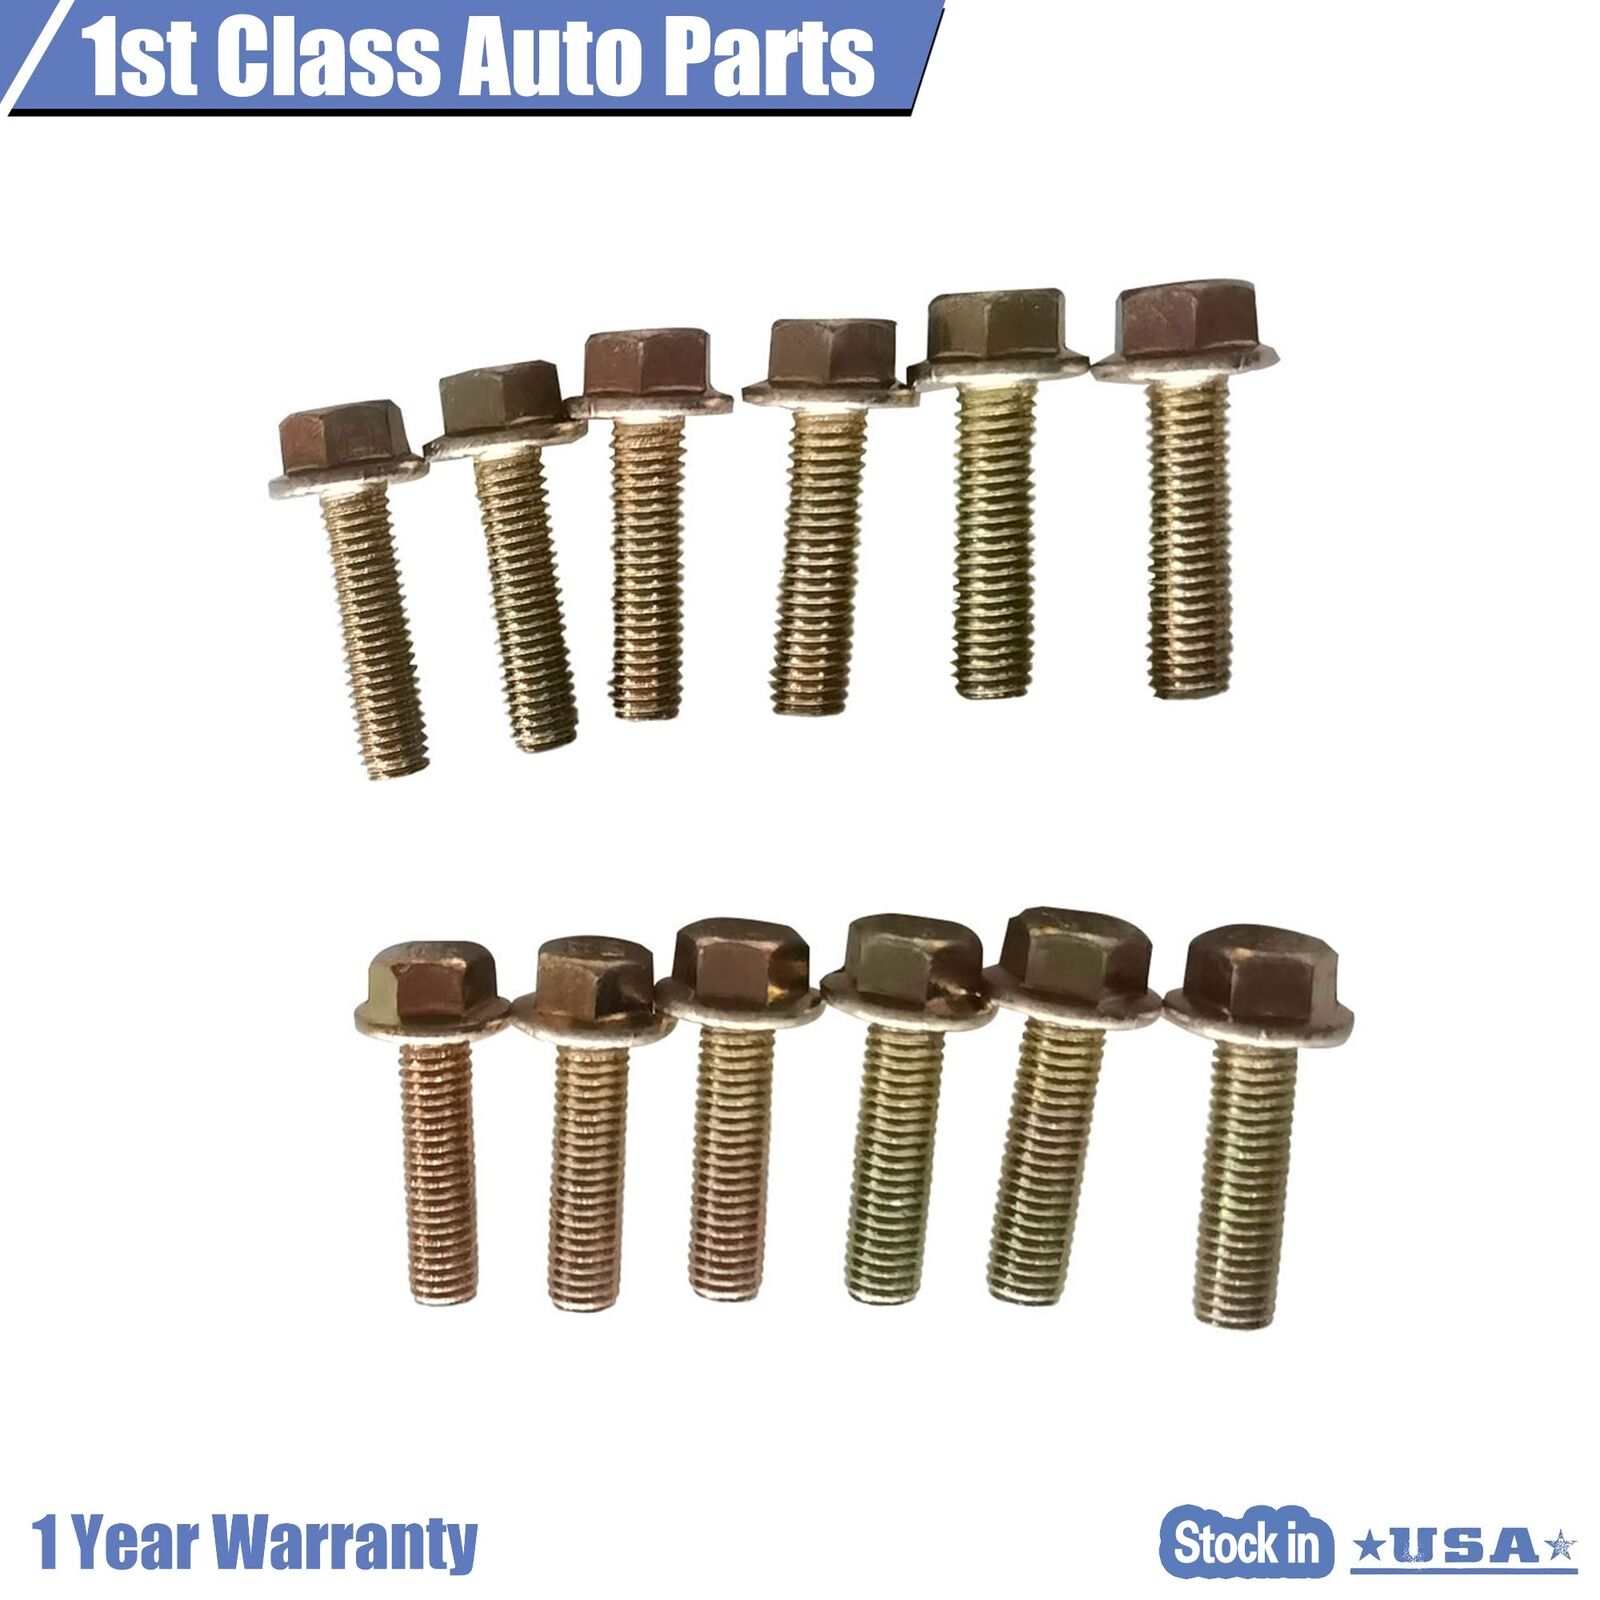 Exhaust Manifold Header Bolts Hardware Kit For 2013 Cadillac Escalade Chevrolet